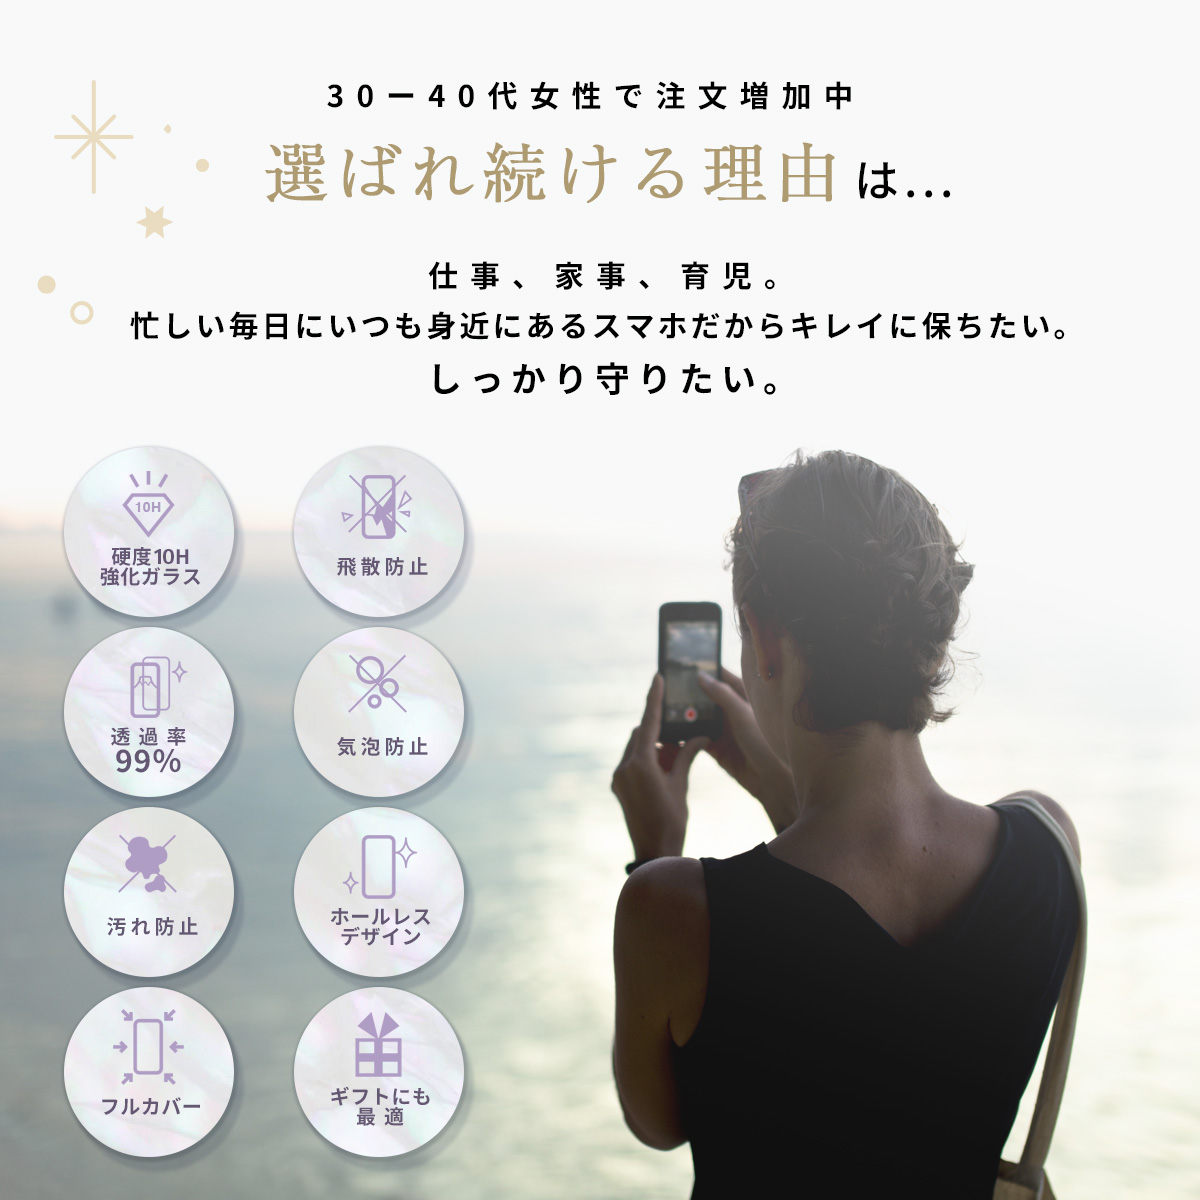 Galaxy S23 ガラス フィルム S23 Ultra S22 S21 S21+ S10+ S20 S22 ultra 5G S10 S9  ギャラクシー 液晶 保護フィルム カバー 全面 硝子 3D 9H 透明 クリア :I6-1G0A-B9W5:MY WAY SMART !店  通販